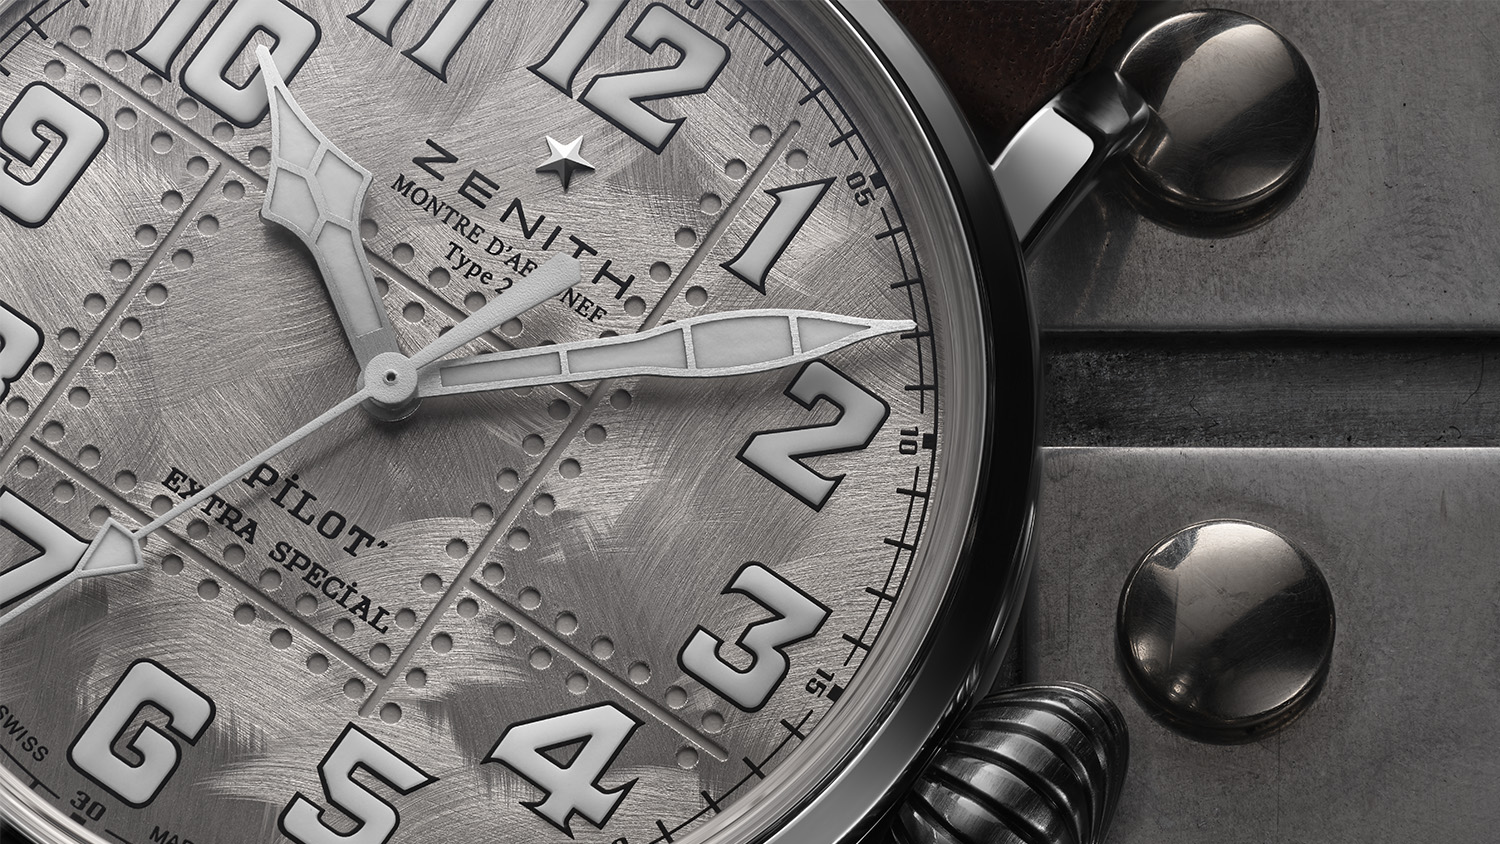 Introducing the Zenith Pilot Type 20 Extra Special Silver